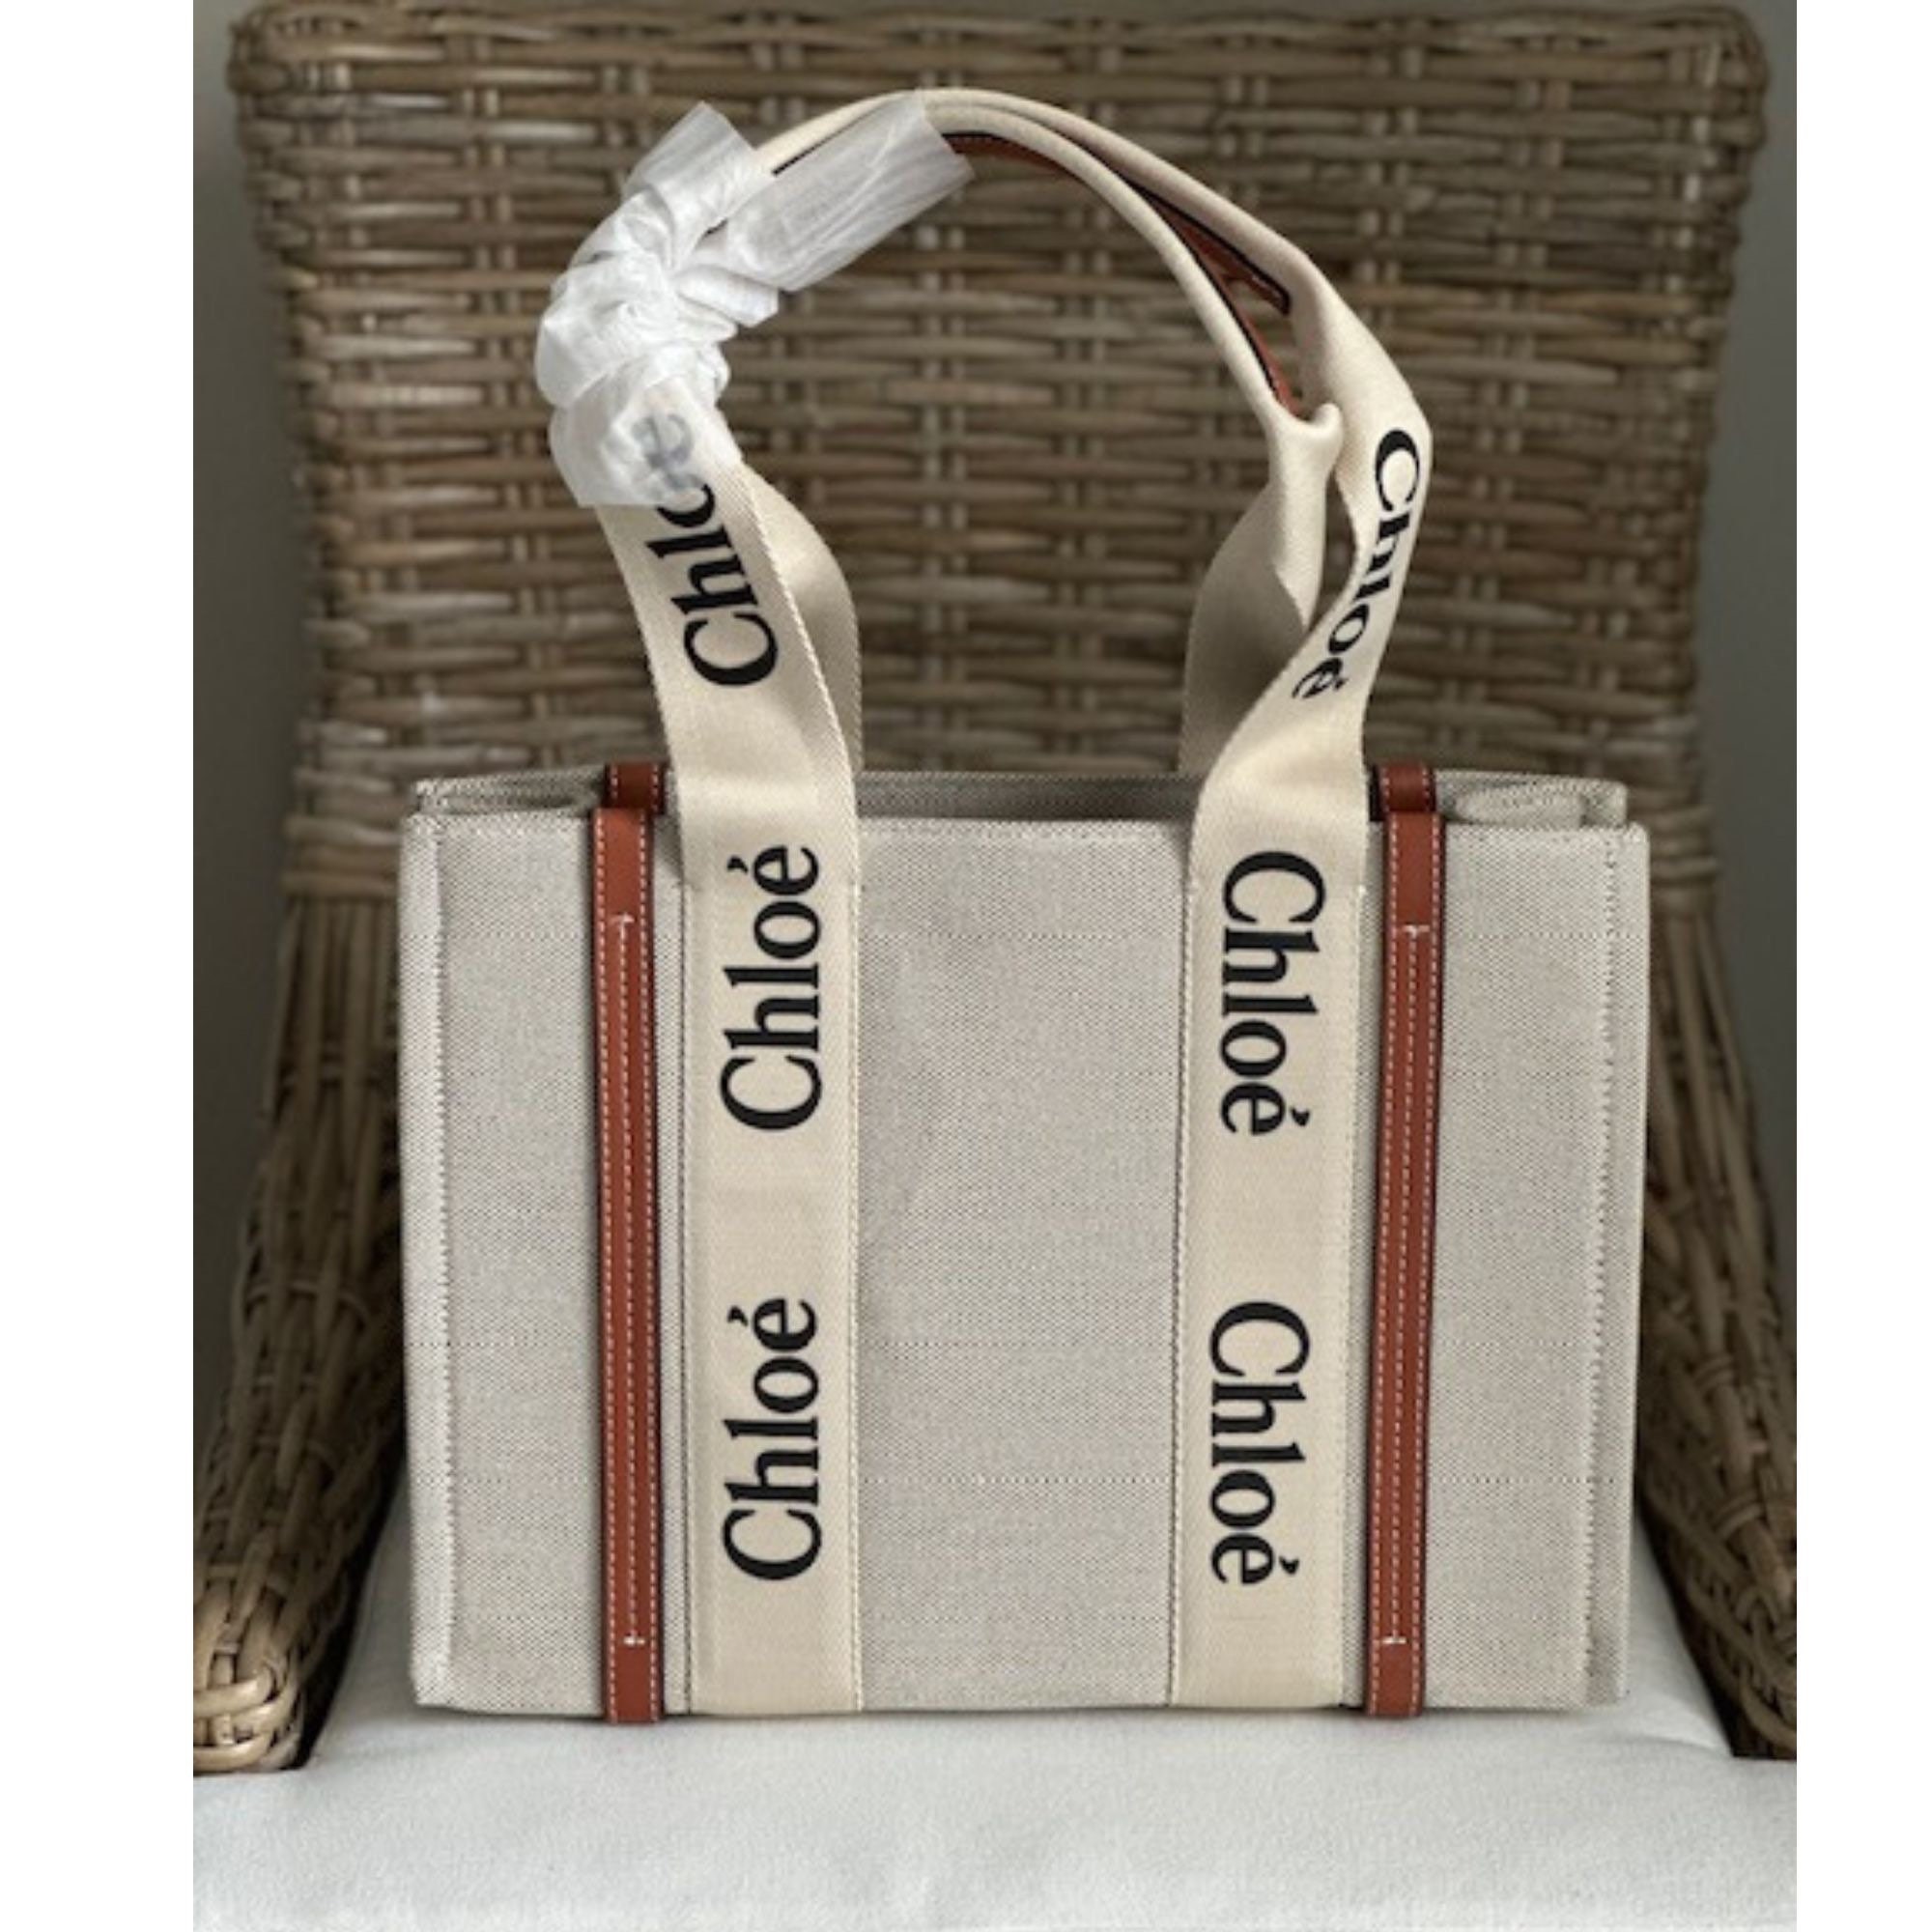 Replacement Shoulder/crossbody Strap for Chloe Woody Tote Bag 